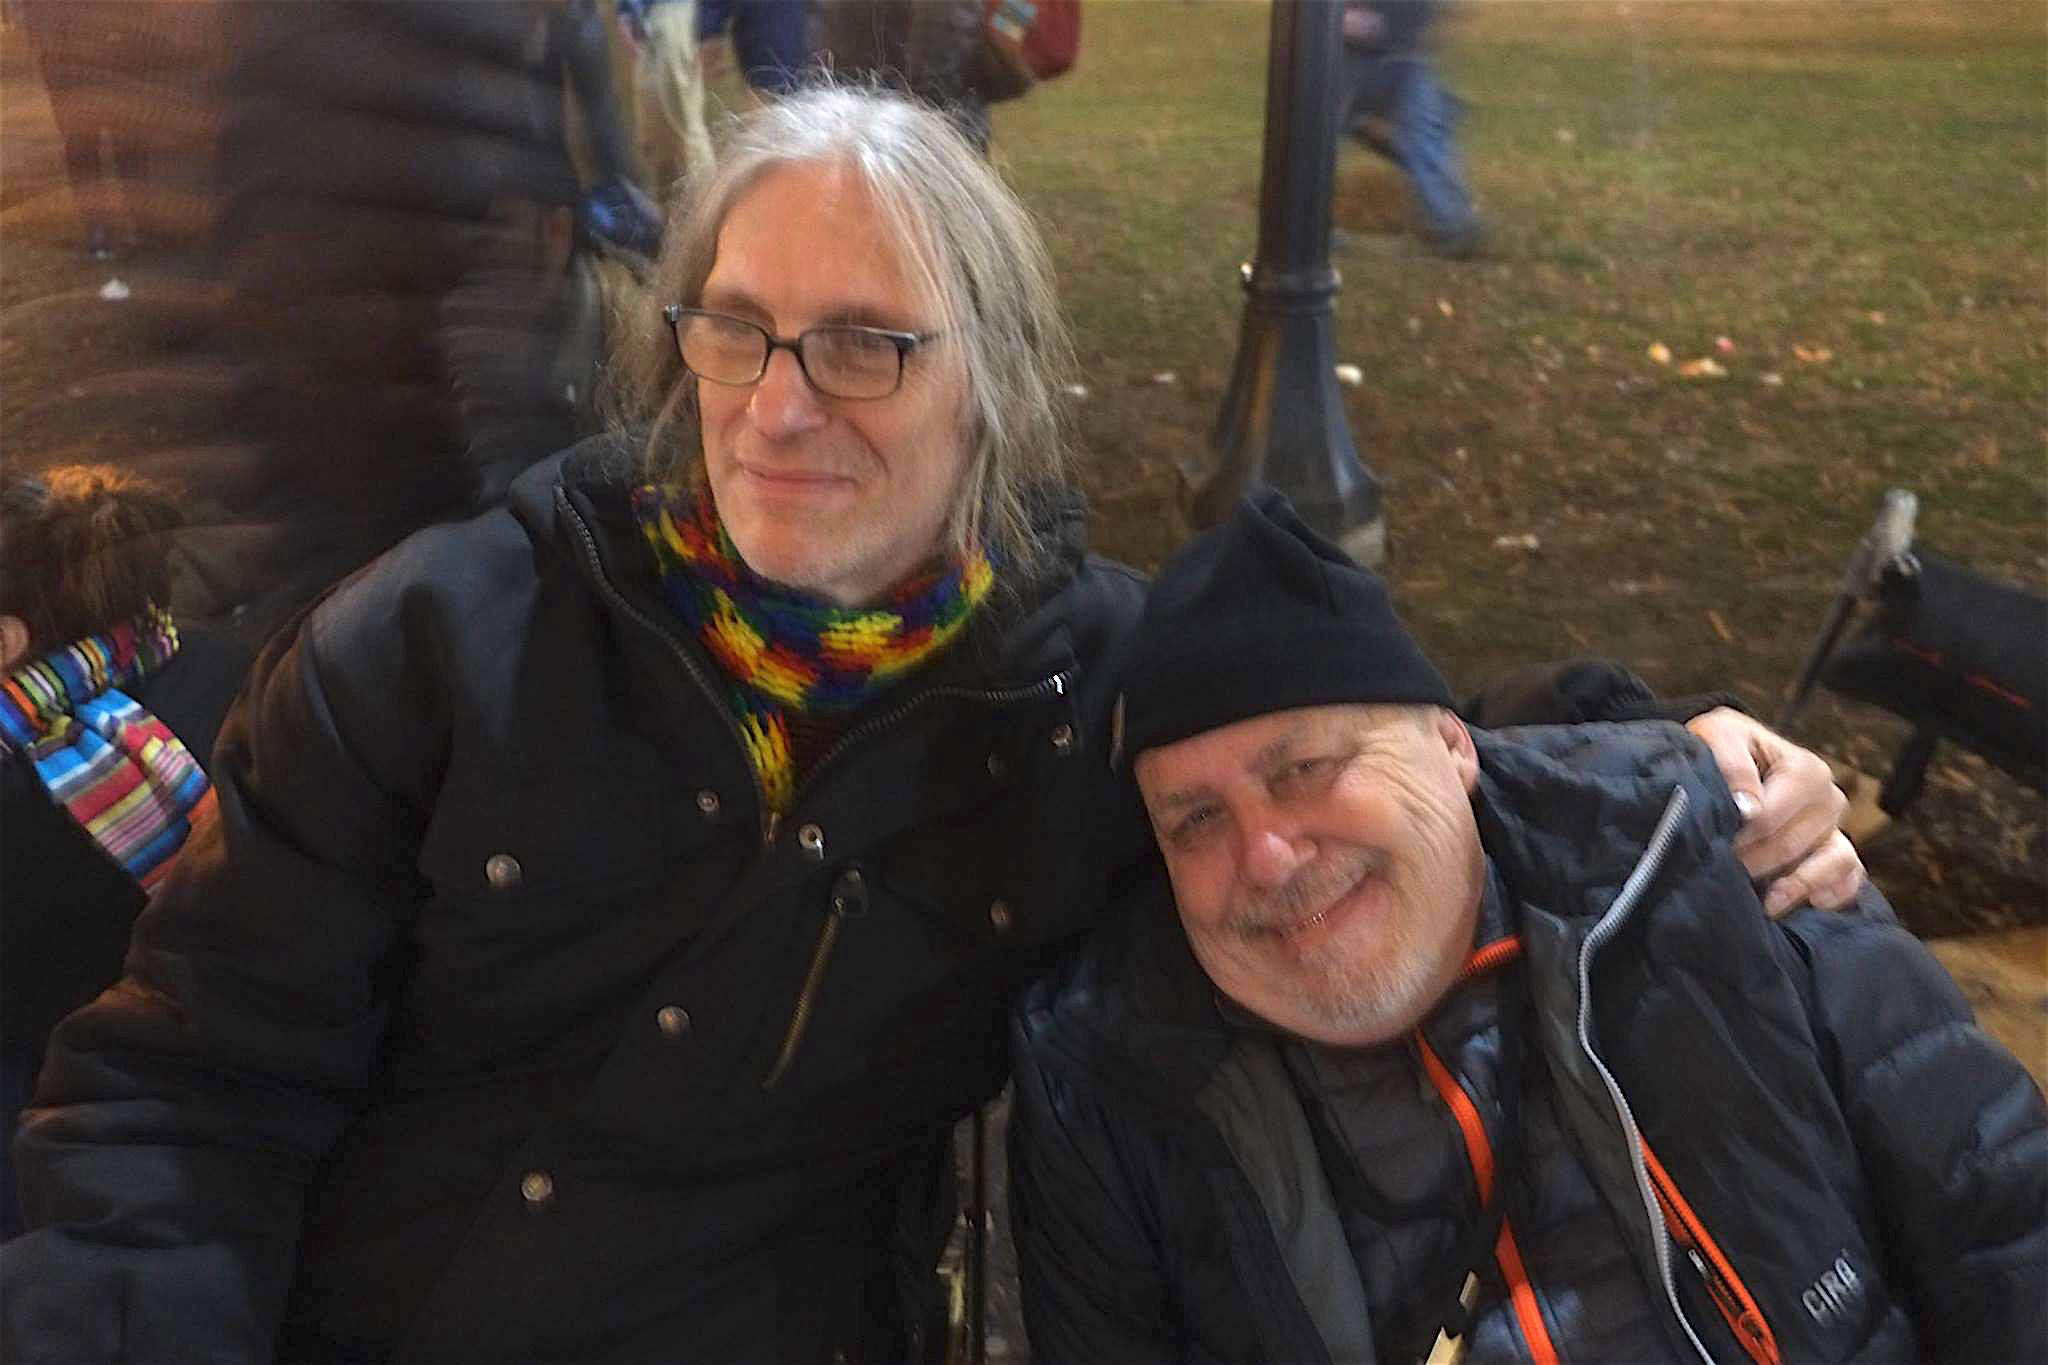 Activist John Penley, right, and East Village radical cartoonist Seth Tobocman at Franklin Square, in Washington, D.C., where Penley co-led an ant-nuclear protest during the inauguration. The two used to be roommates in the East Village.